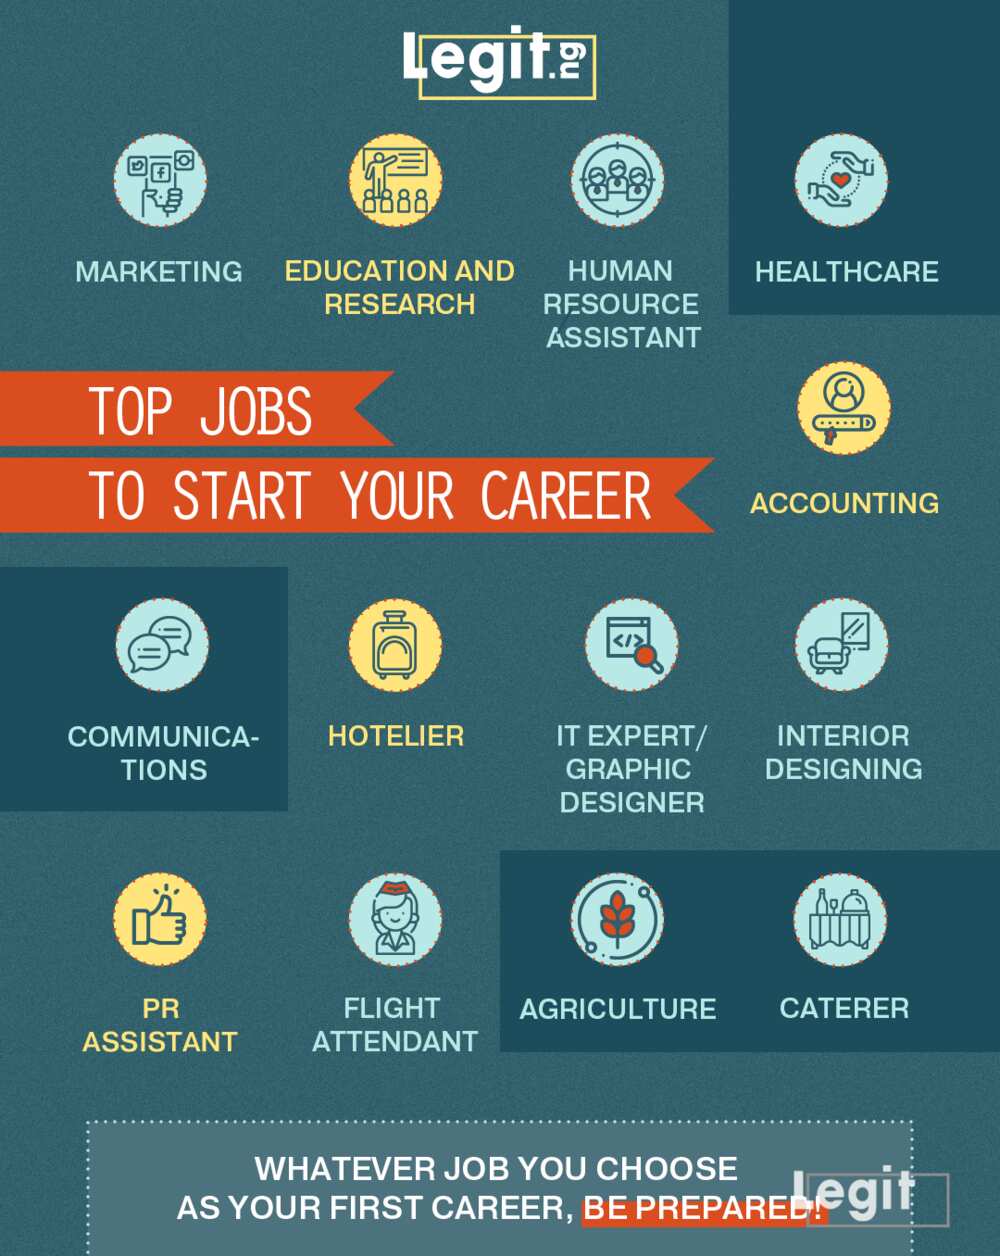 13 top jobs that will help start your career Legit.ng